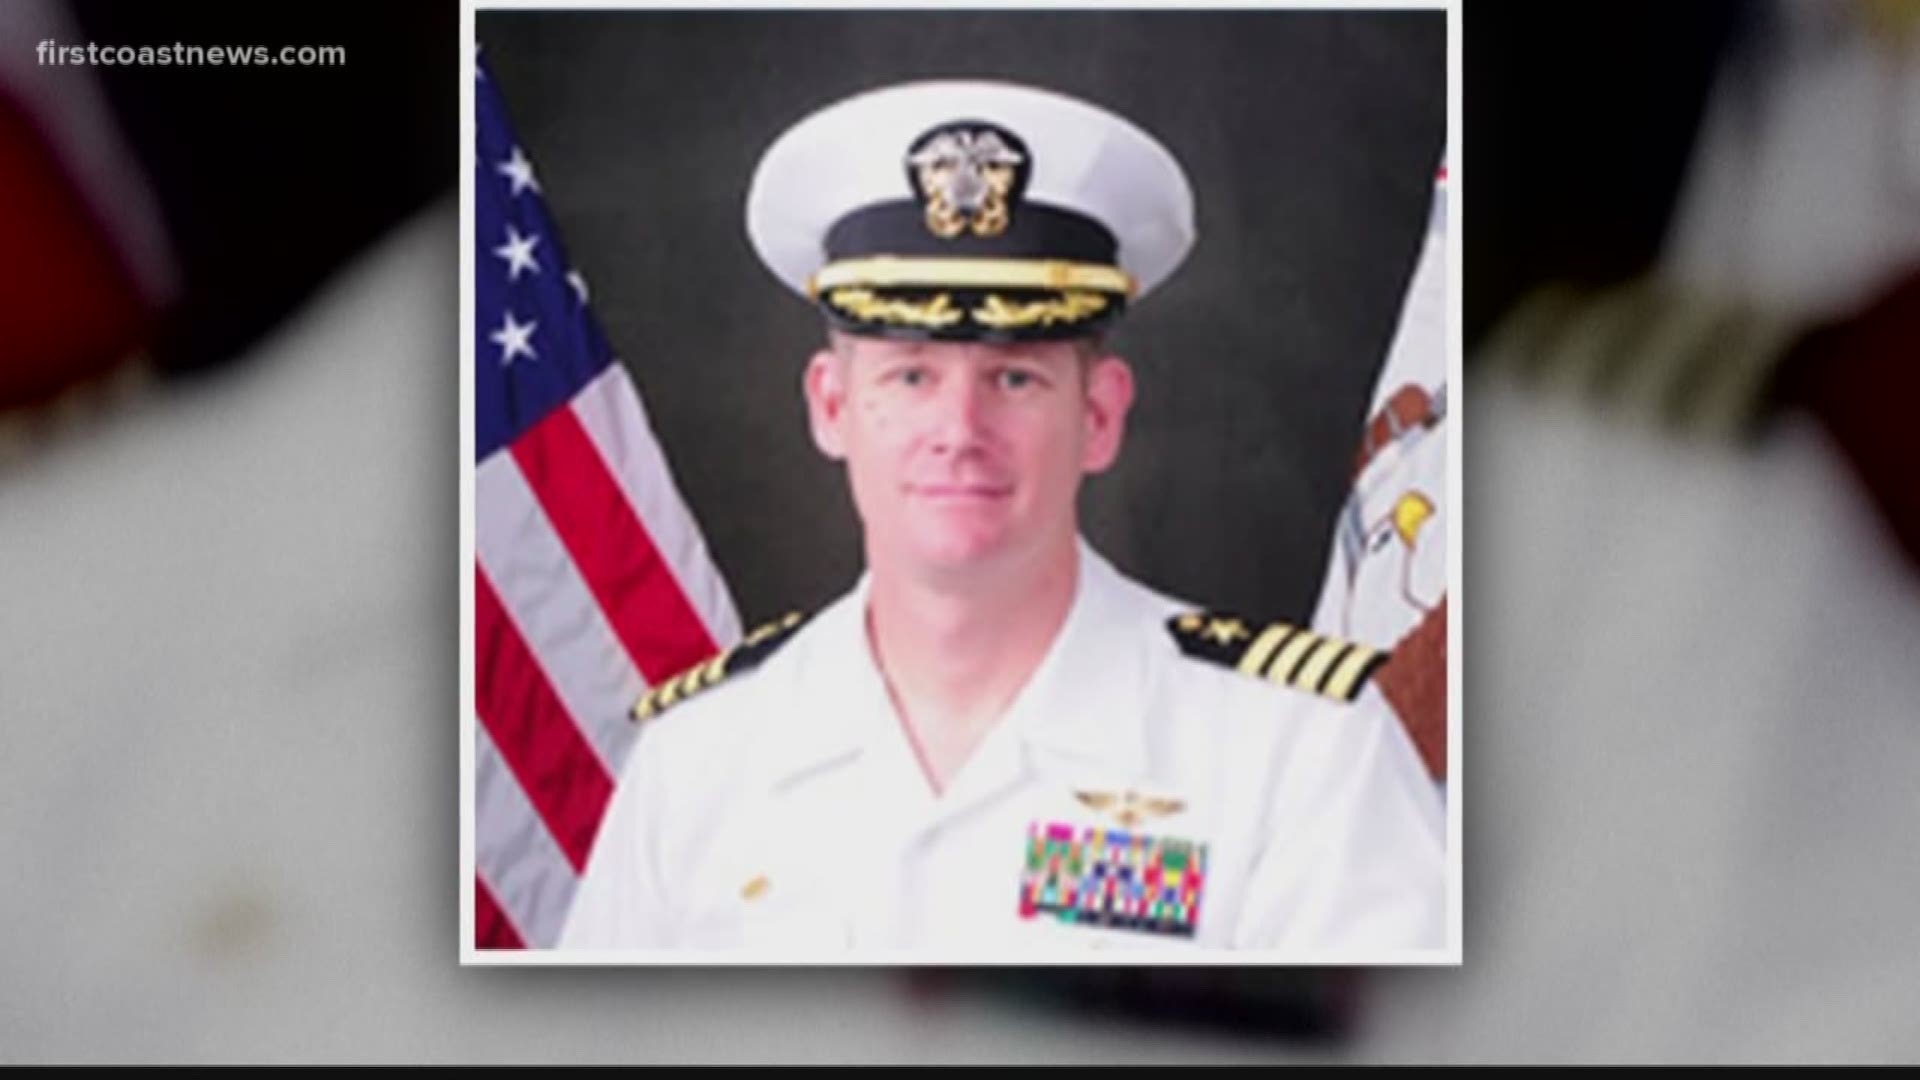 The Navy commander was removed from his post as commander of Guantanamo Bay Naval Base following the disappearance and death of Christopher Tur.